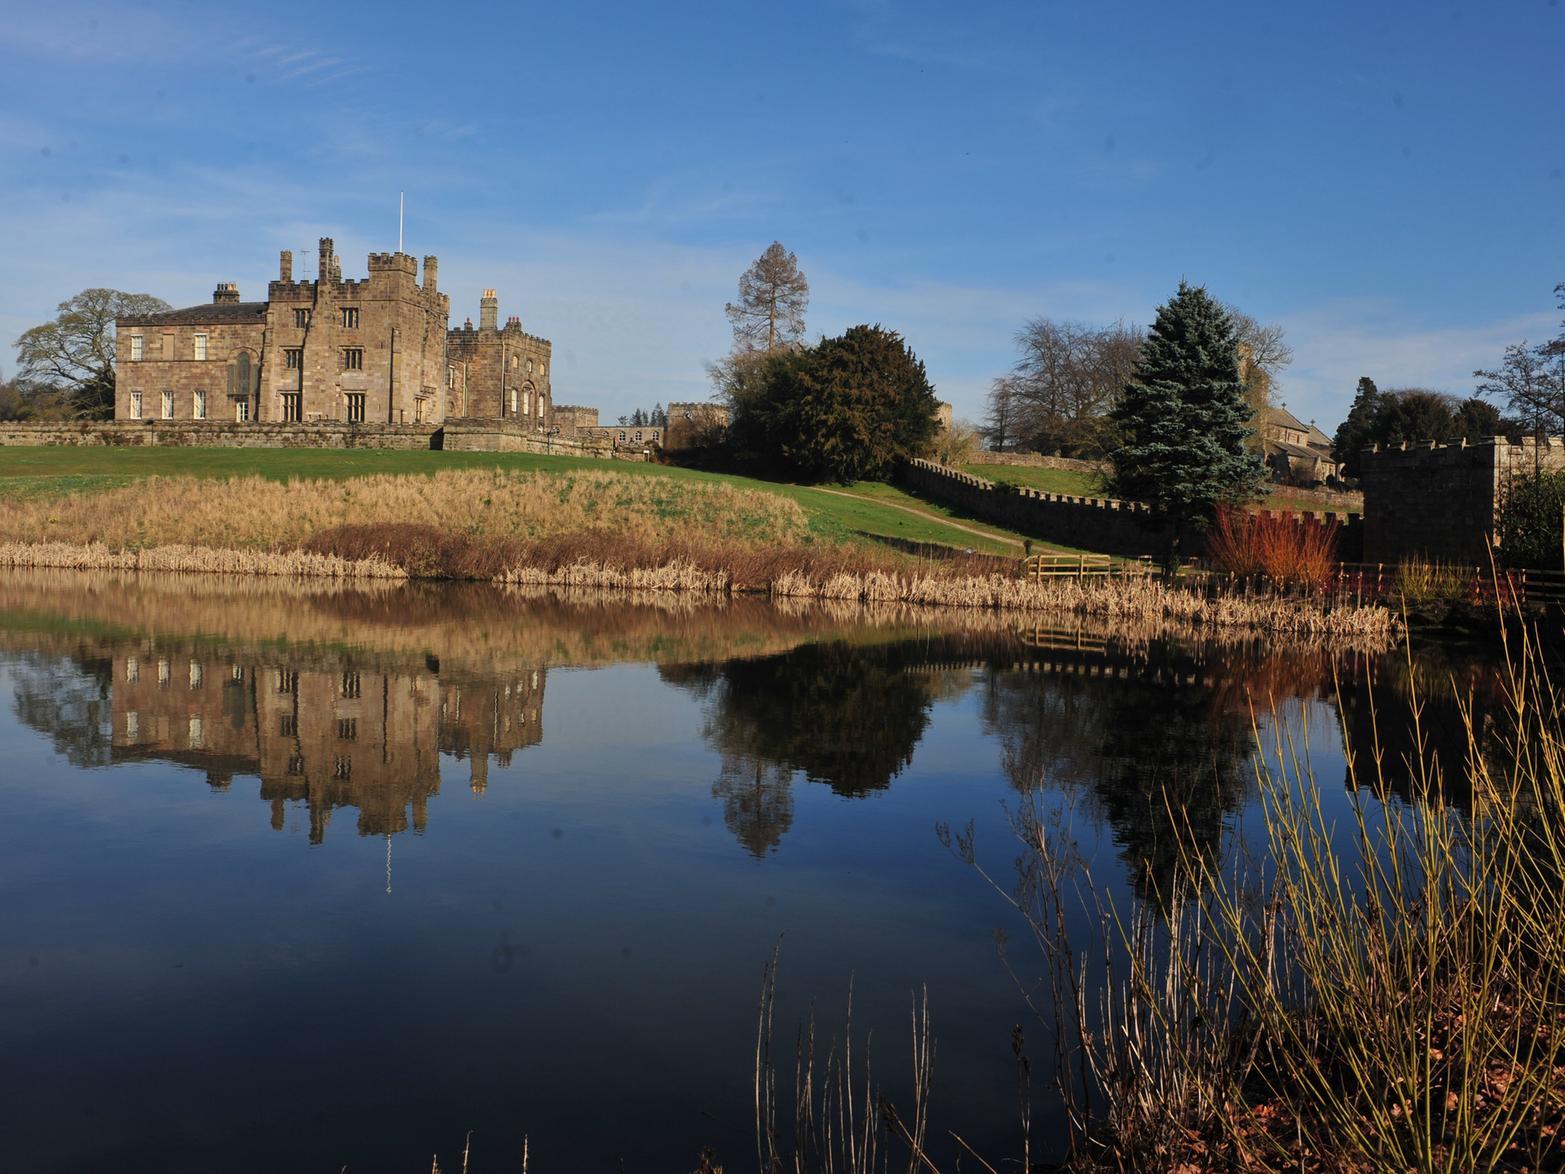 It's got it all - history, architecture and beautiful scenery, so get wrapped up and take a stroll around Ripley Castle and Gardens this January.